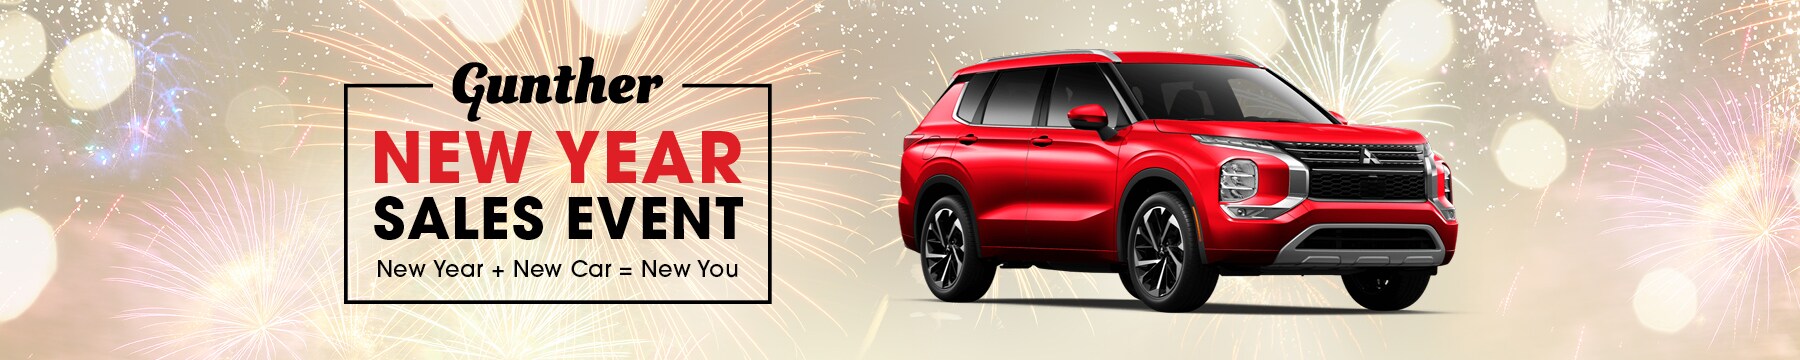 Gunther New Year Sales Event. New Year + New Car = New You.